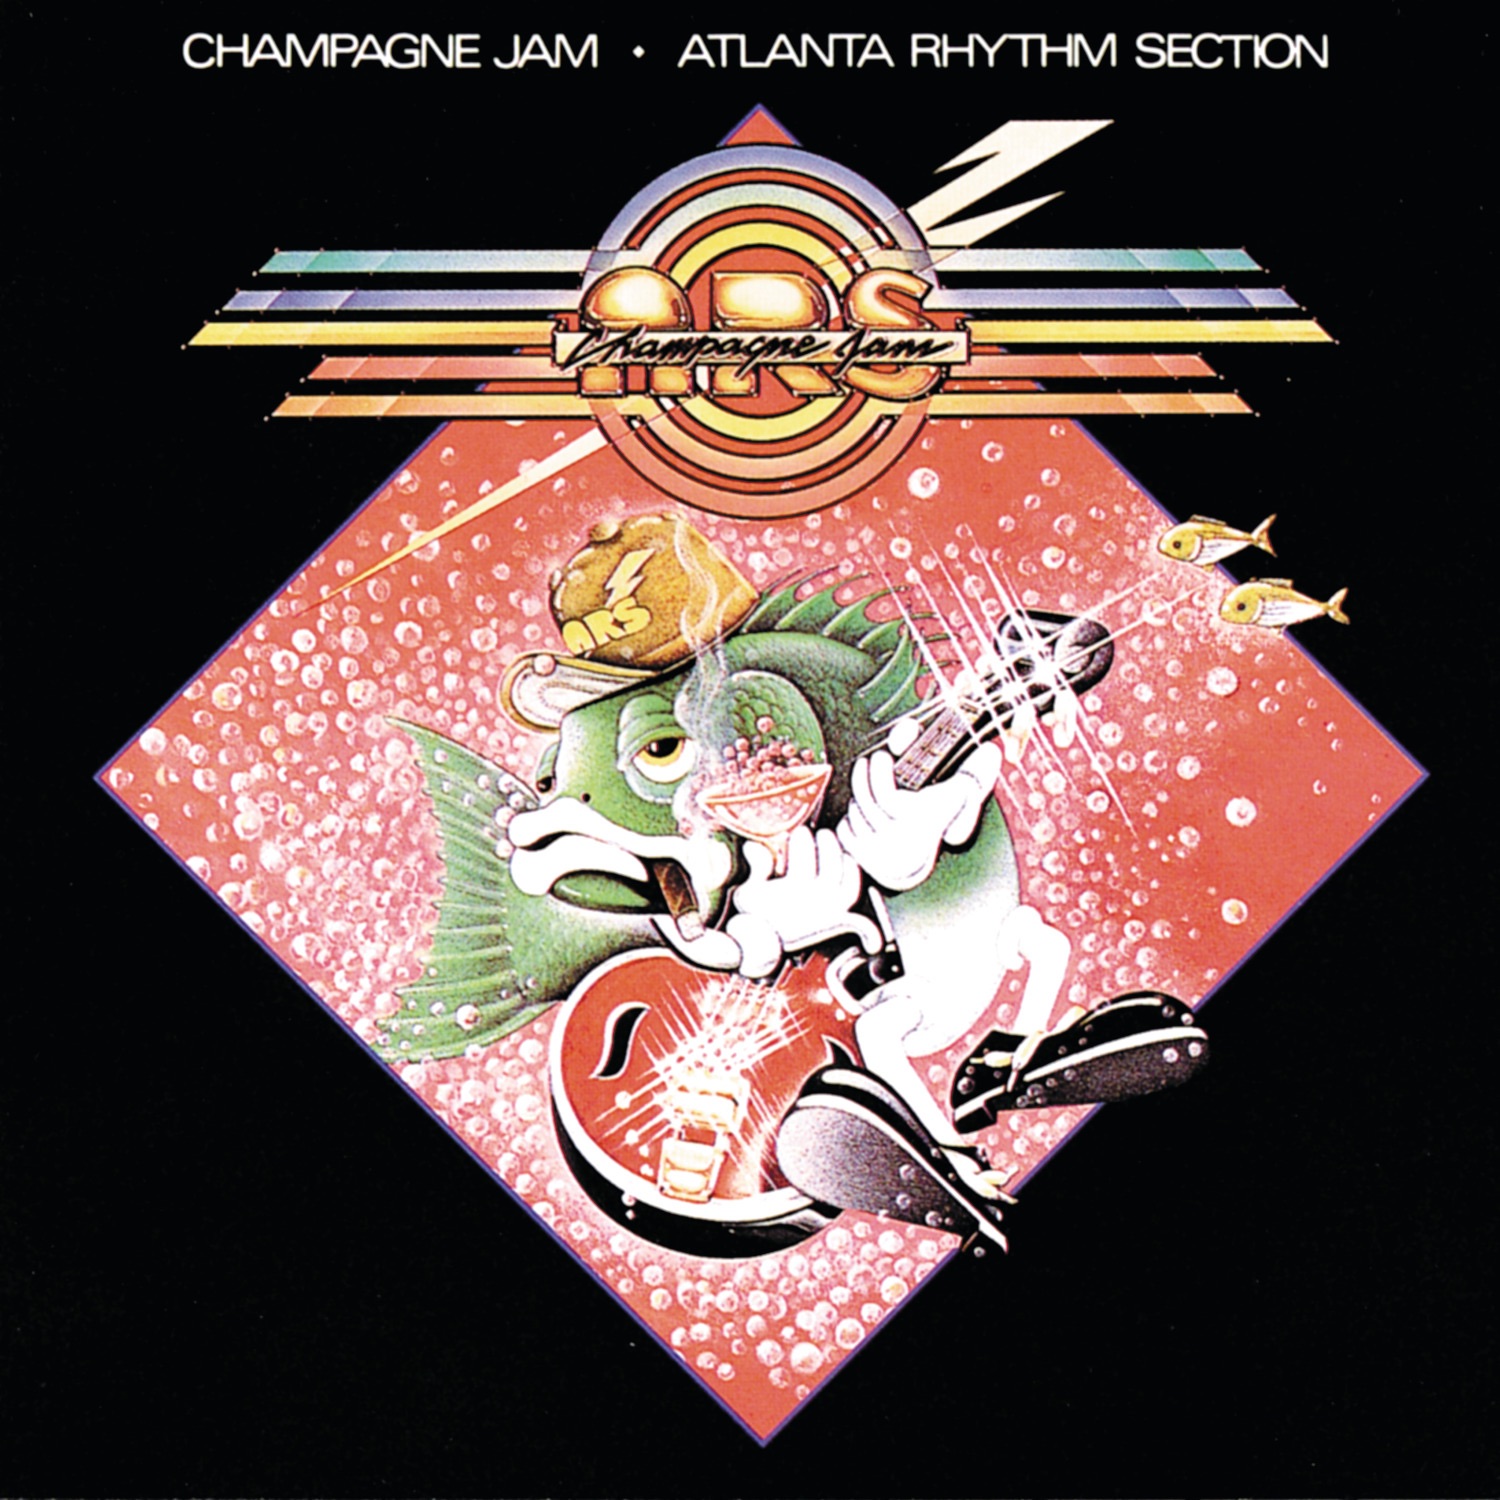 Art for I'm Not Gonna Let It Bother Me Tonight by Atlanta Rhythm Section